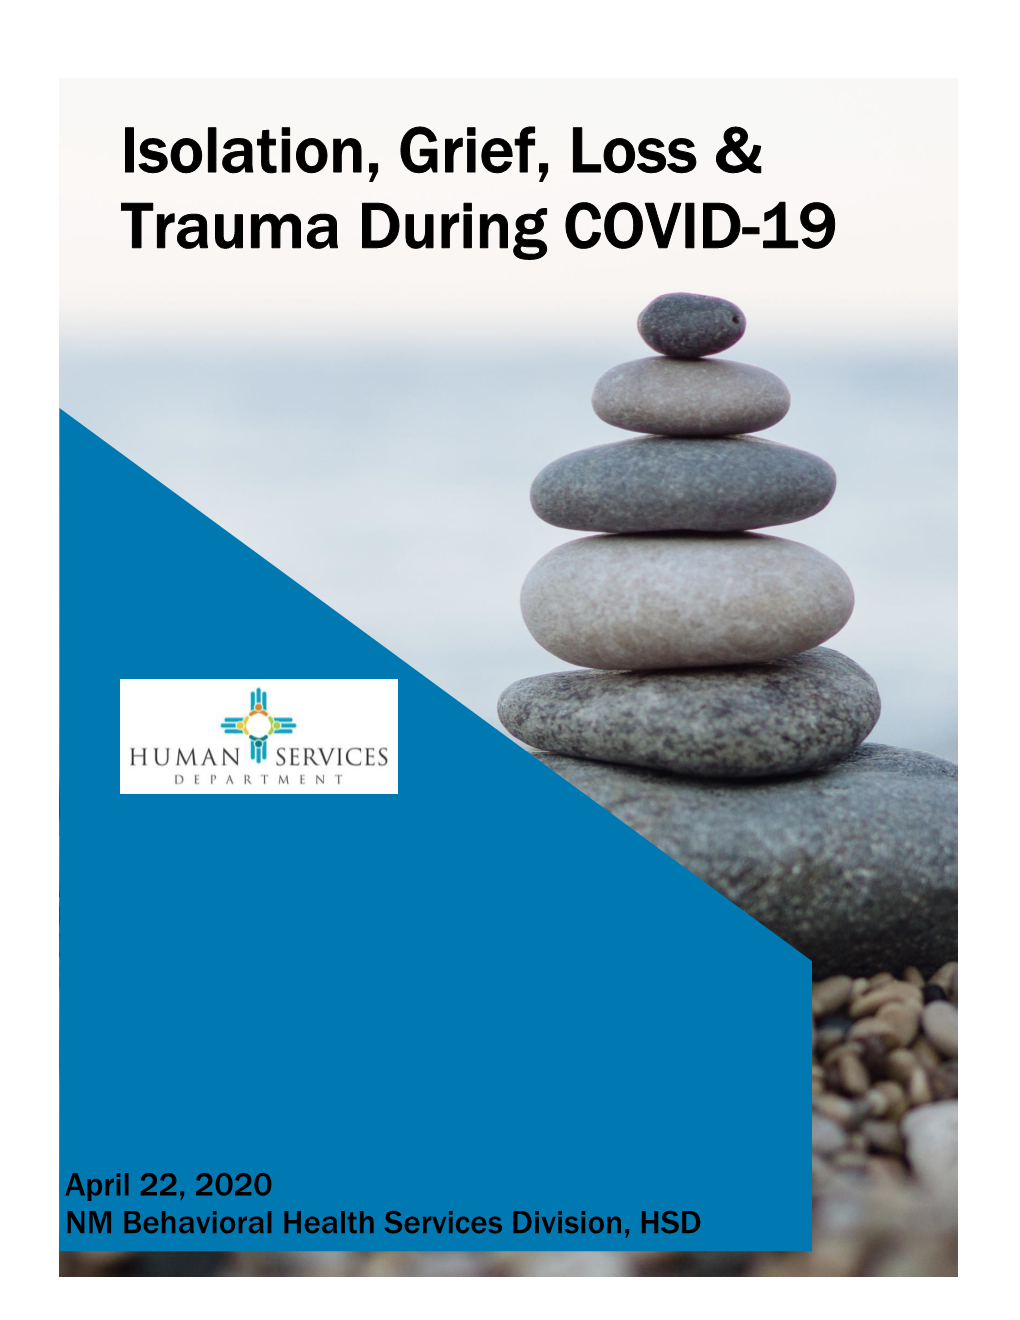 Isolation, Grief, Loss & Trauma During COVID-19